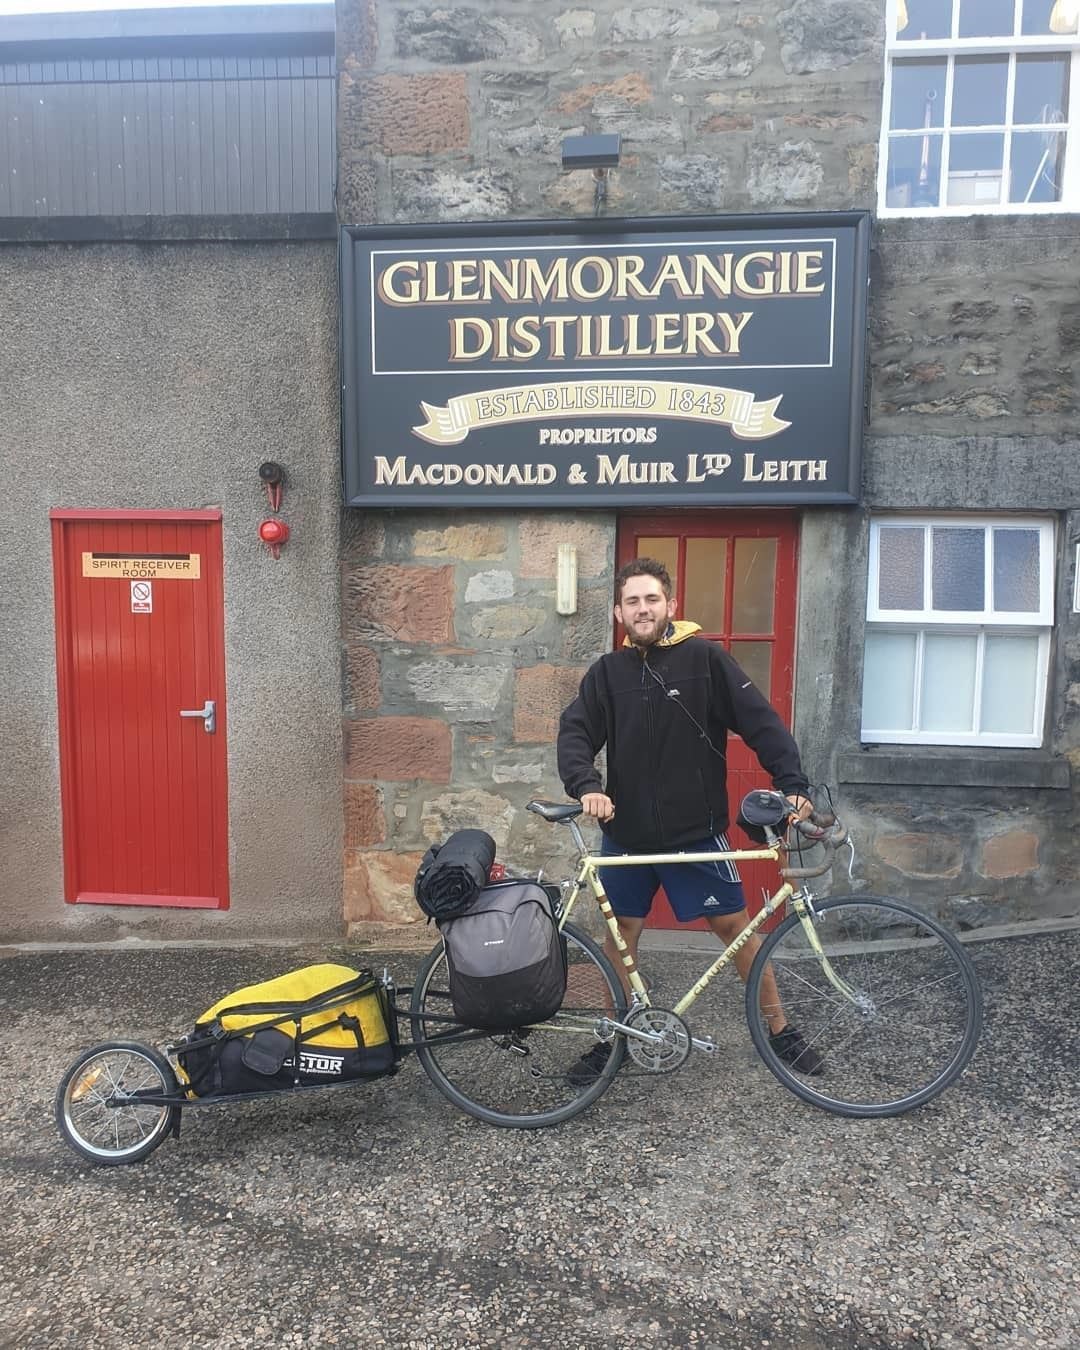 A wee dram to warm up at Glenmorangie Distillery in Tain.